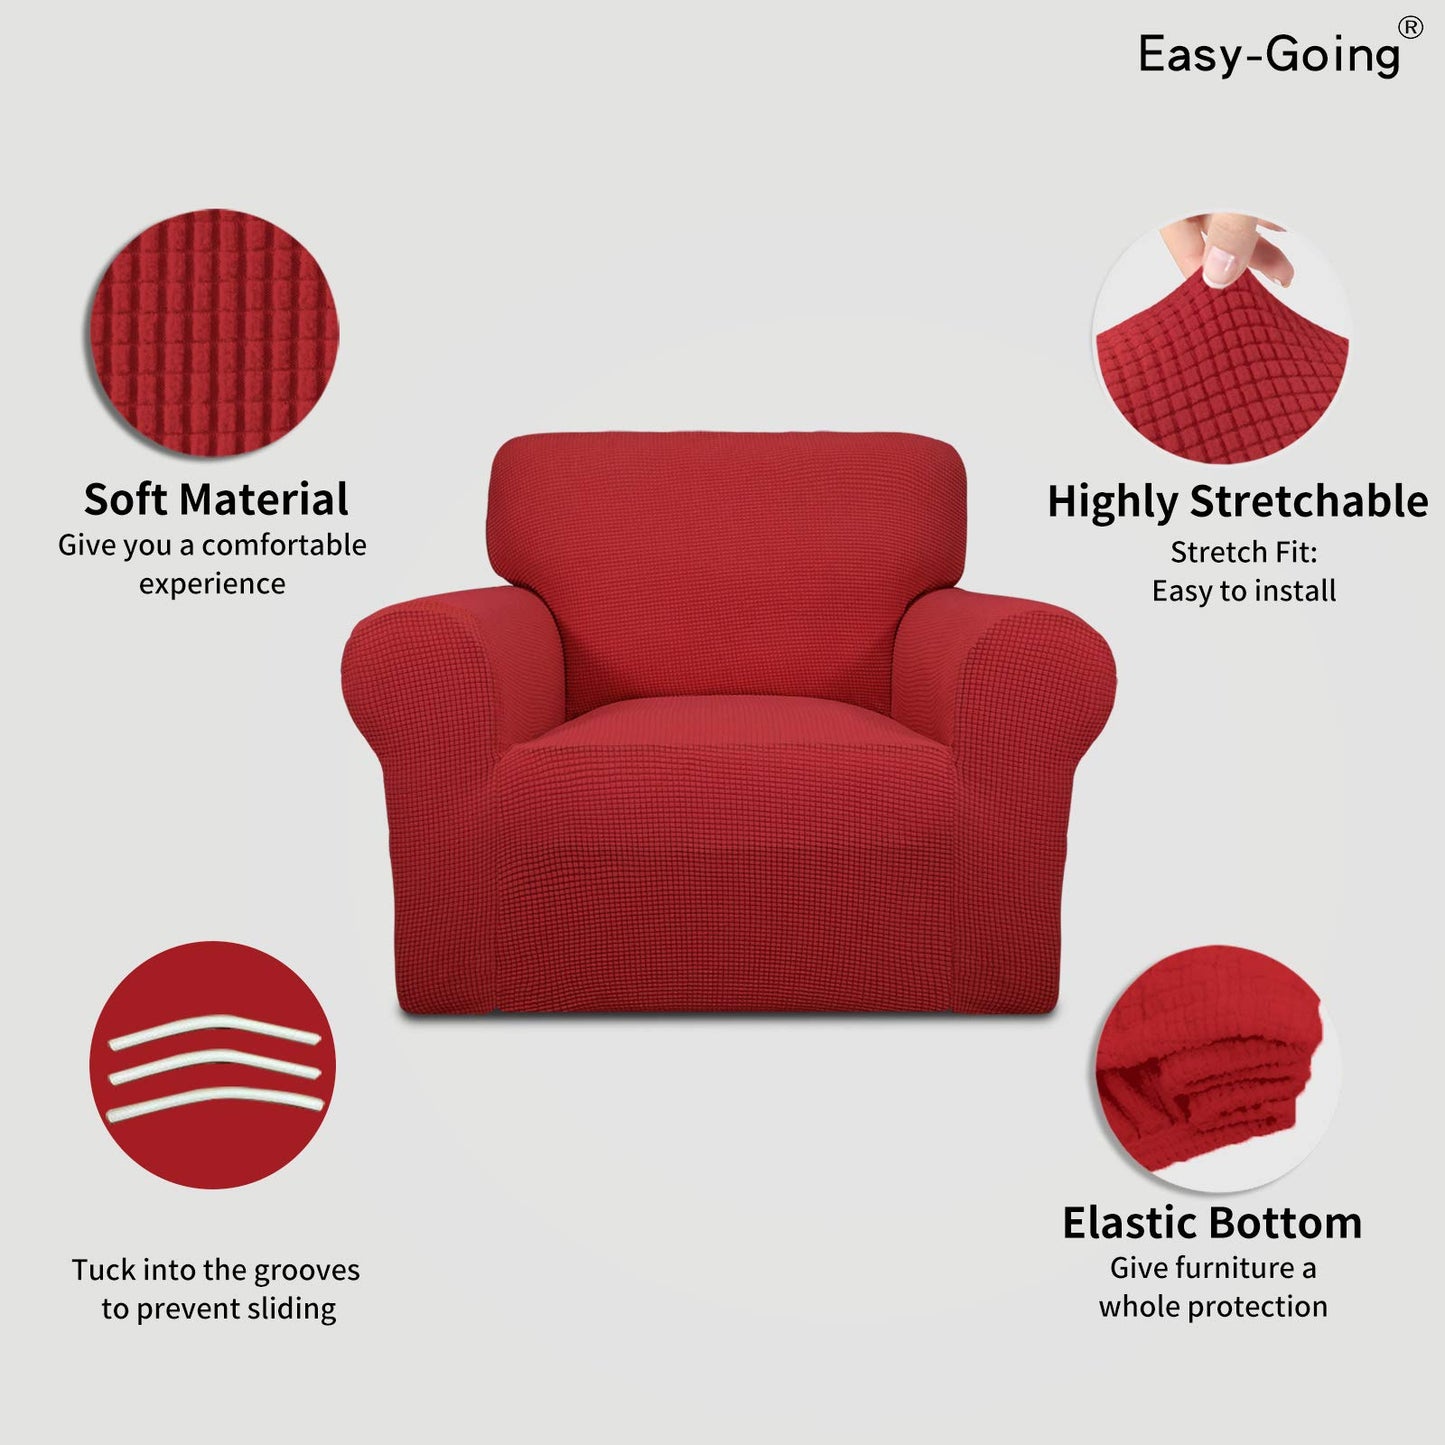 Easy-Going Stretch Chair Sofa Slipcover 1-Piece Couch Sofa Cover Furniture Protector Soft with Elastic Bottom for Kids, Pet. Spandex Jacquard Fabric Small Checks (Chair, Christmas Red)